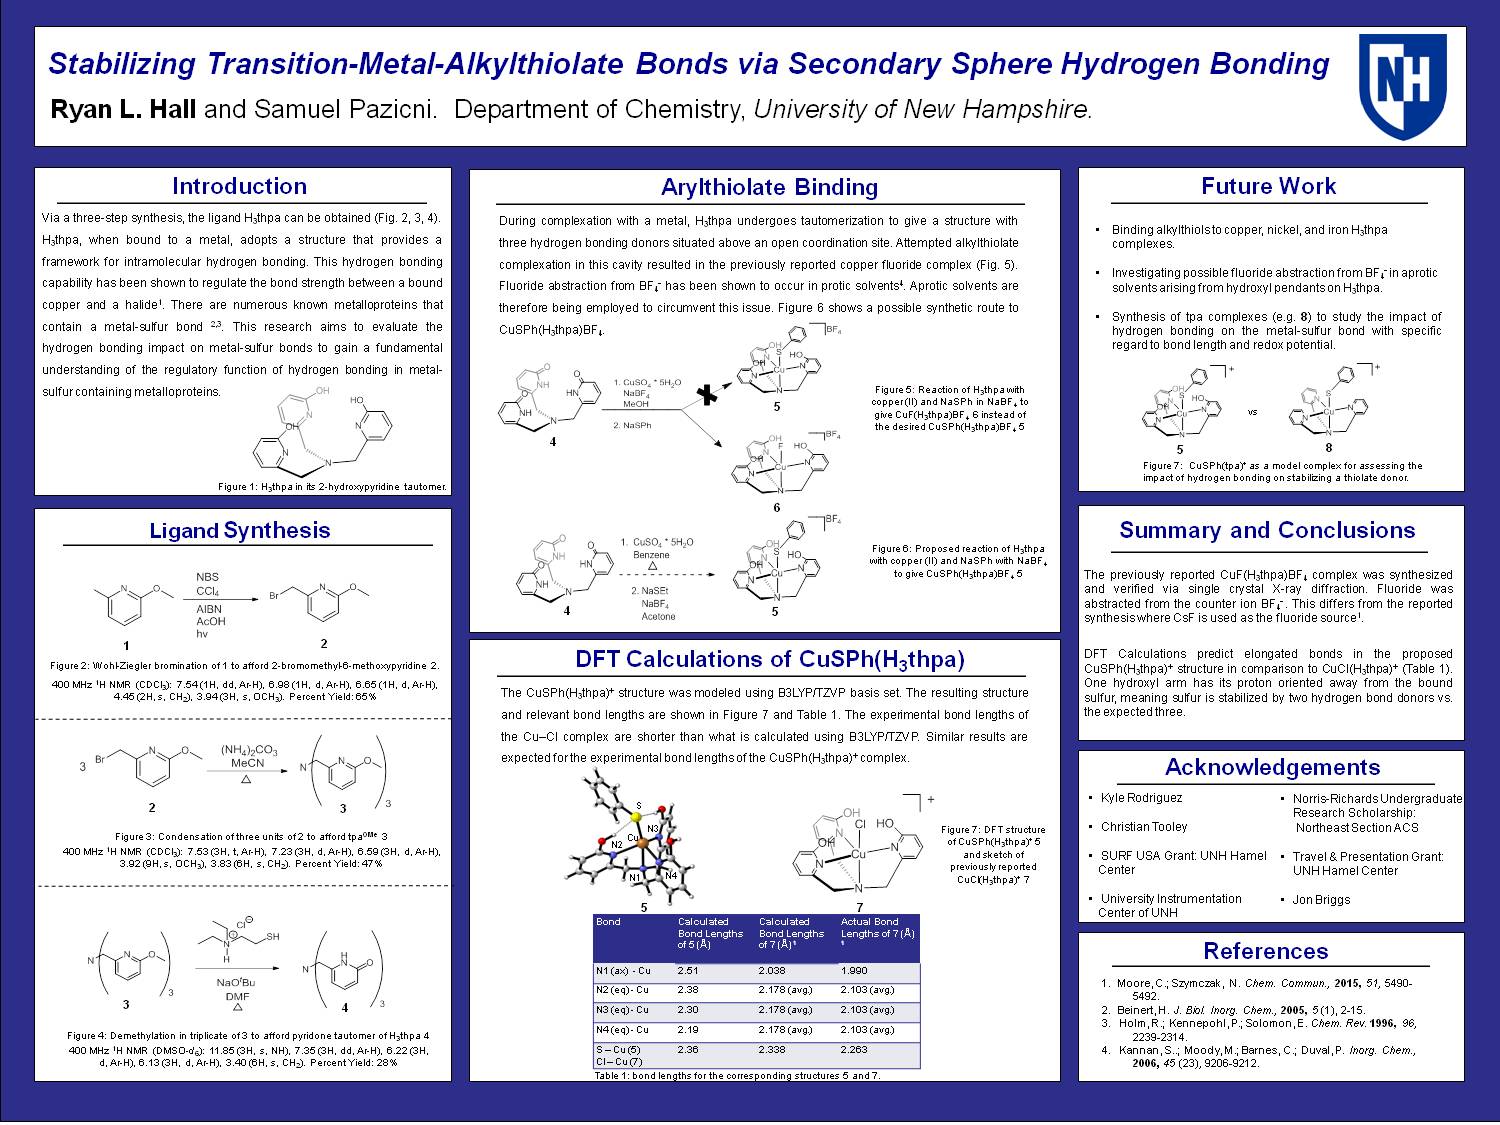 Stabilizing Transition-Metal-Alkylthiolate Bonds Via Secondary Sphere Hydrogen Bonding by rll367